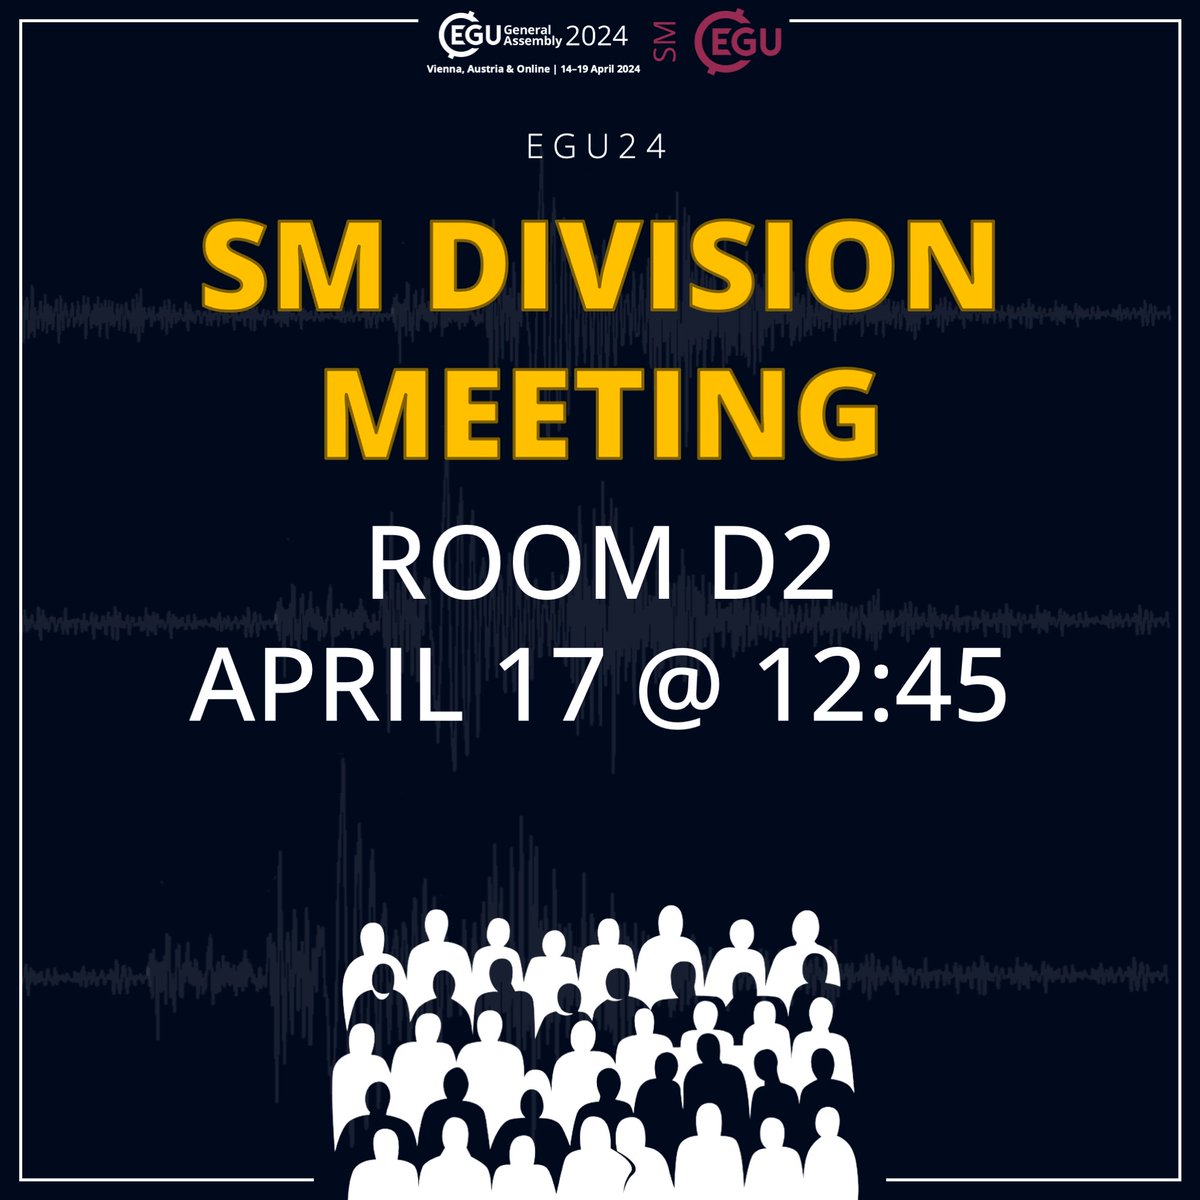 Hey fellow seismologists! Don’t miss out our annual division meeting at #EGU24 today at 12:45pm! You’ll find out more about the things happening in the Seismology Division @egu_seismo and make connections with other #seismologists! See you there! @EuroGeosciences #EGU24_SM